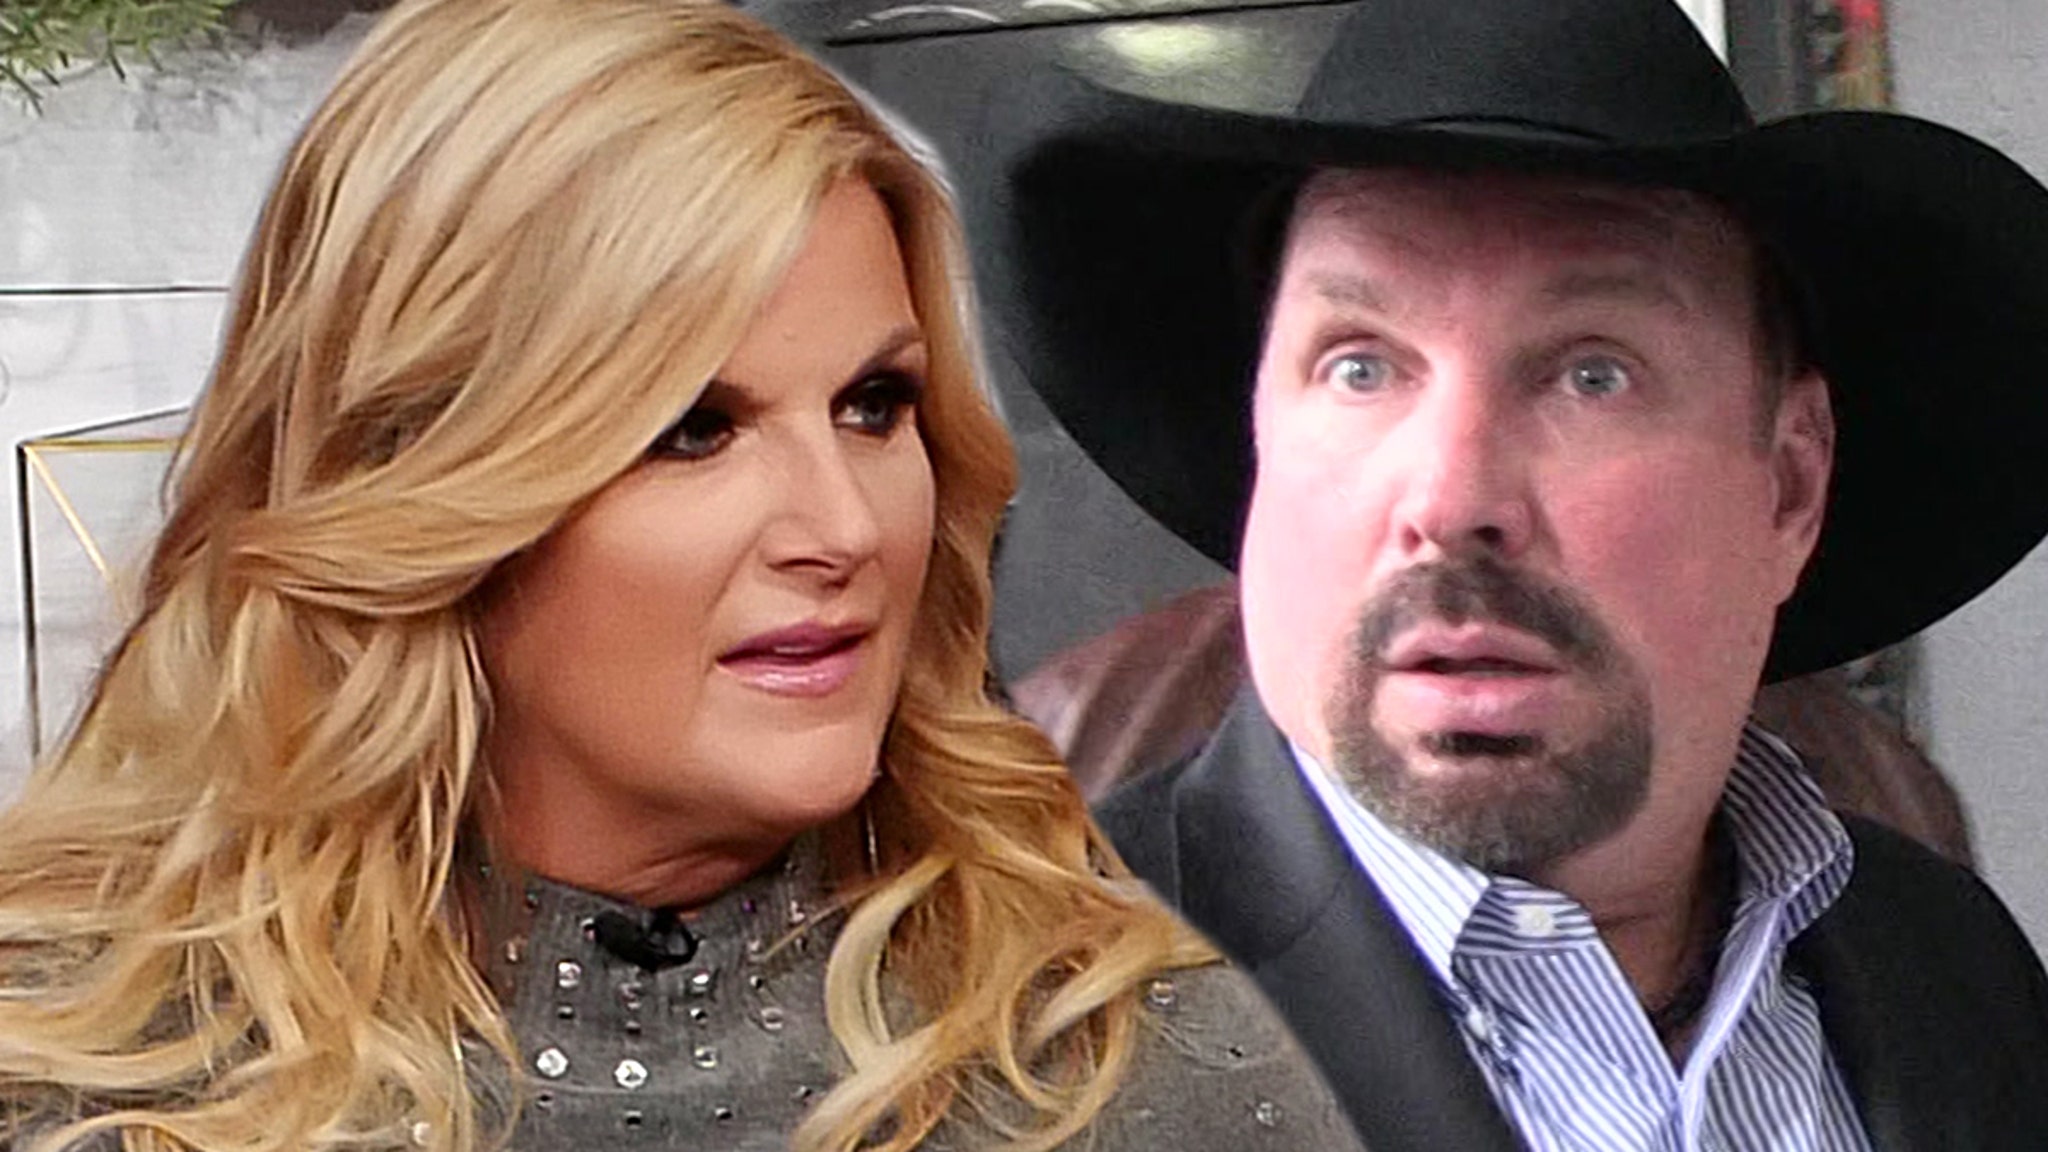 Garth Brooks’ wife, Trisha Yearwood, is positive about COVID, he is negative